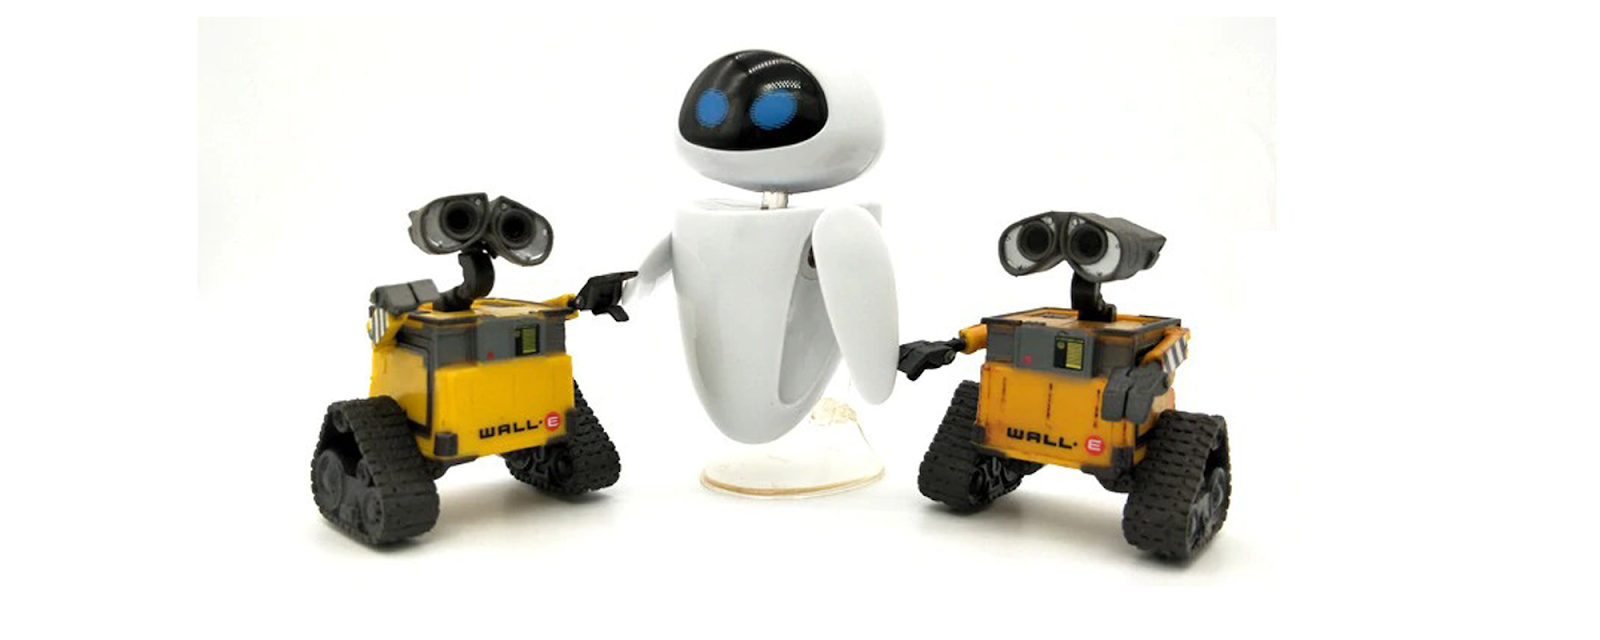 Wall- E Robot Wall & EVE PVC Action Figure Collection ...